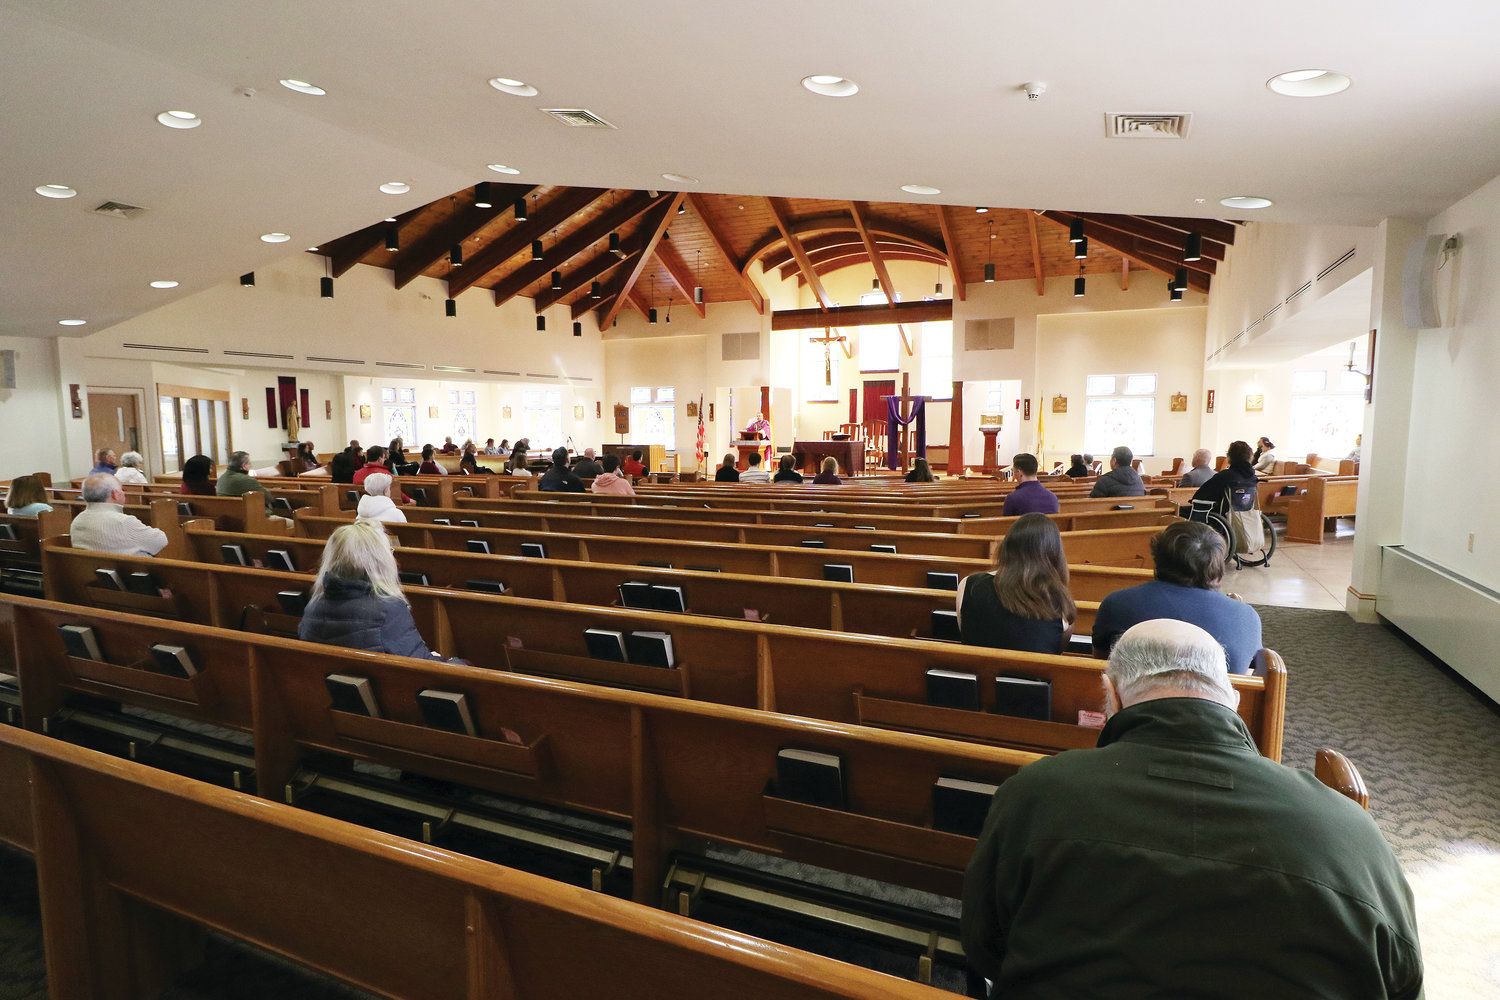 Public Masses, Liturgical Services Suspended Across Diocese As Coronavirus Spreads | Rhode Island Catholic